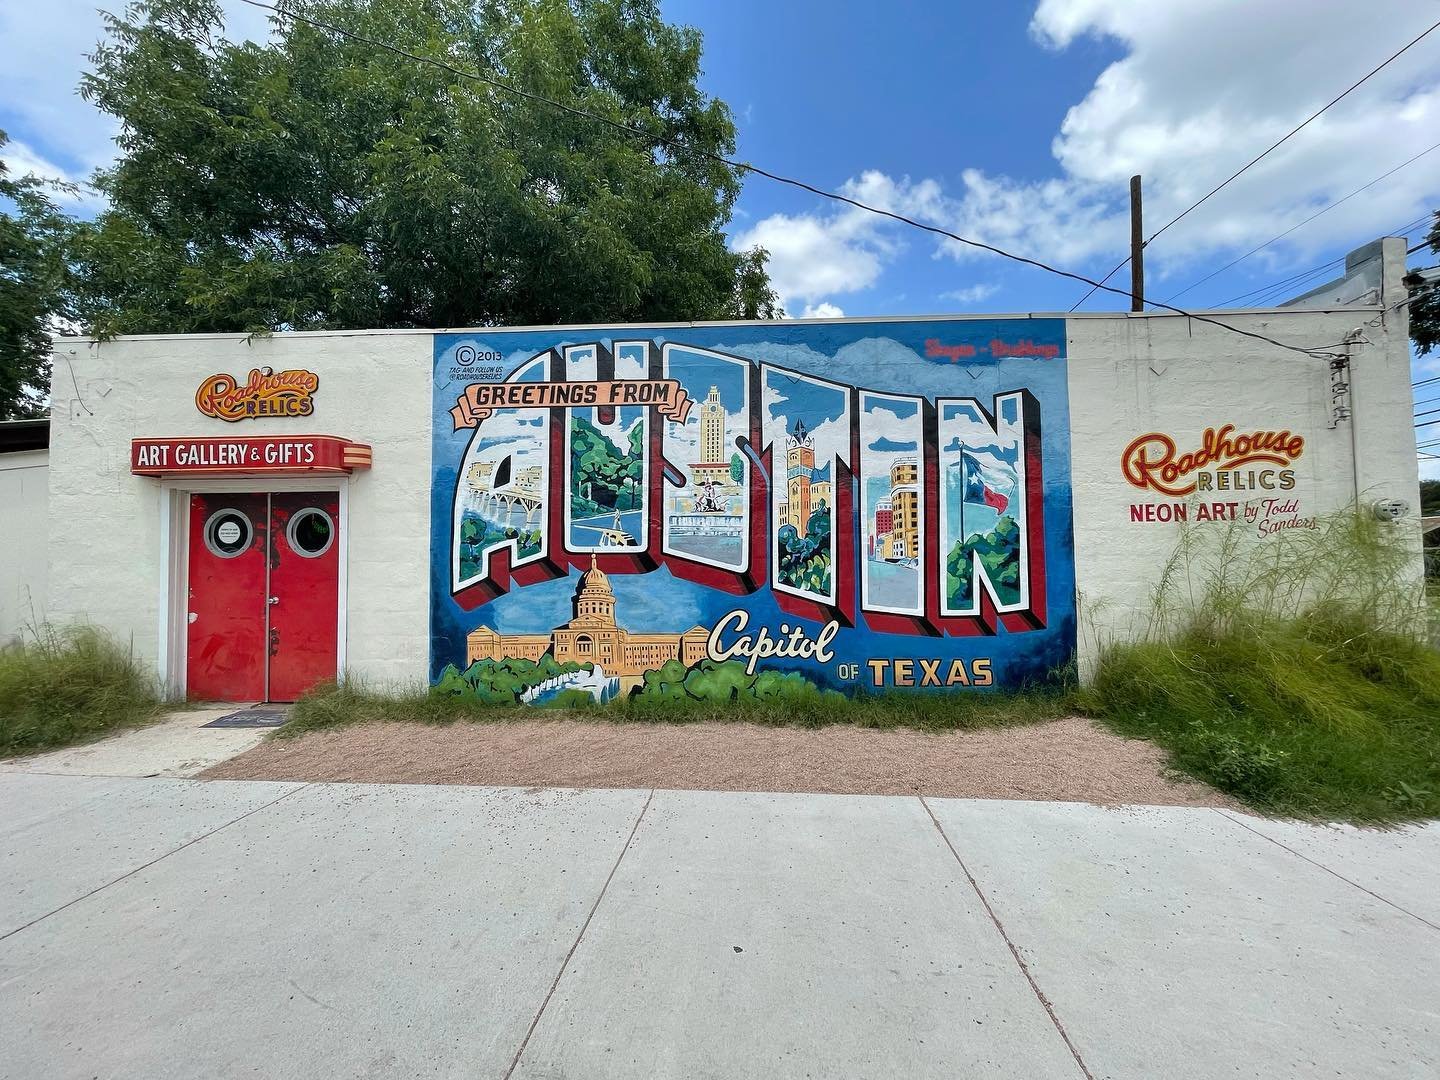 The City of Austin, Texas offers two public art opportunities for Texas based artists. Apply by August 18th.